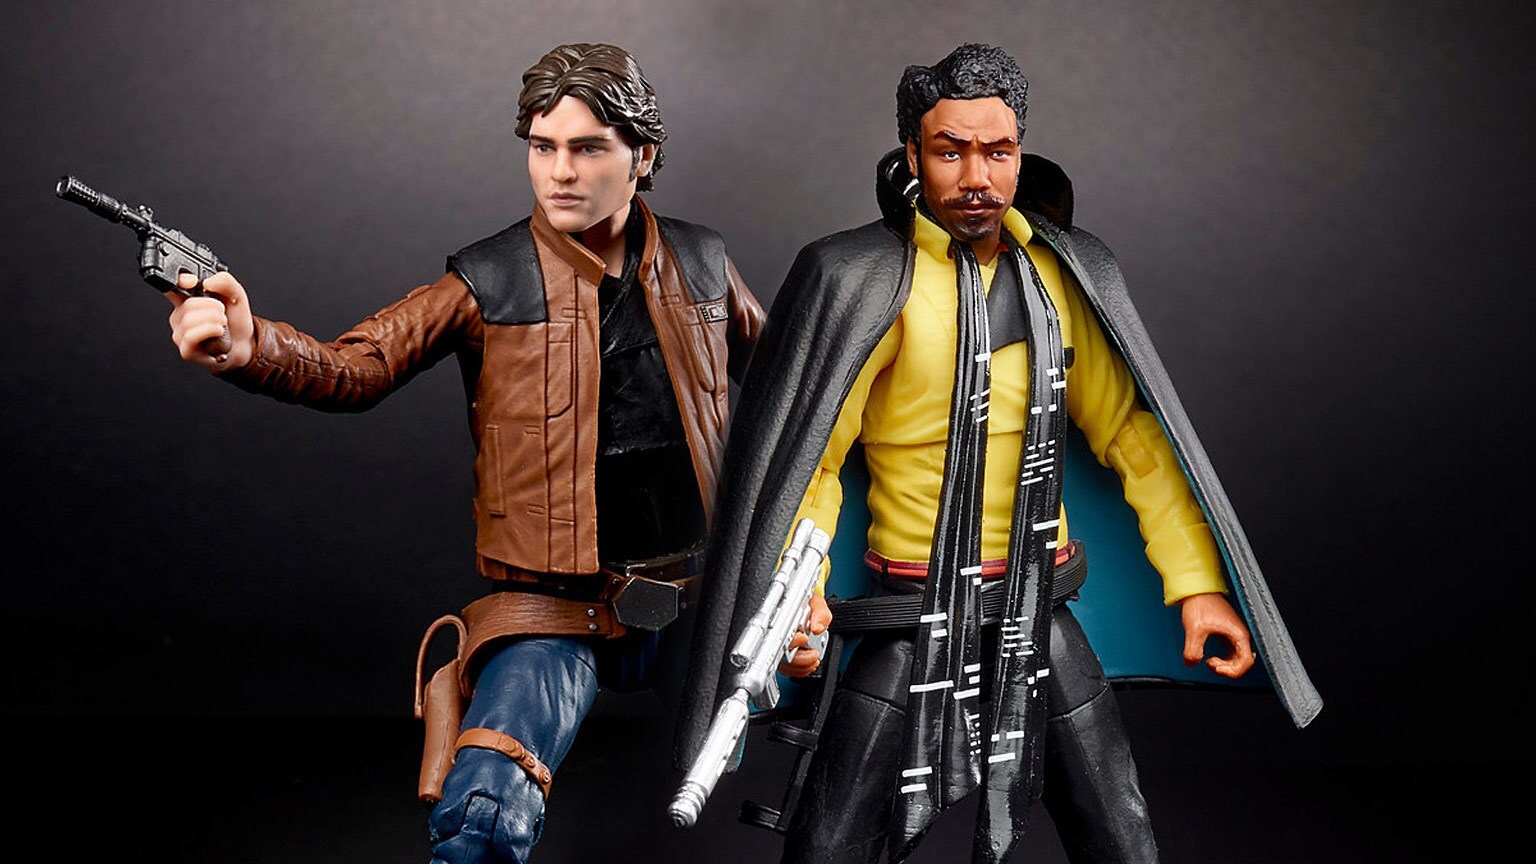 "It's Magic": Inside Hasbro's Solo: A Star Wars Story Black Series Figures, New Millennium Falcon Toy, and More